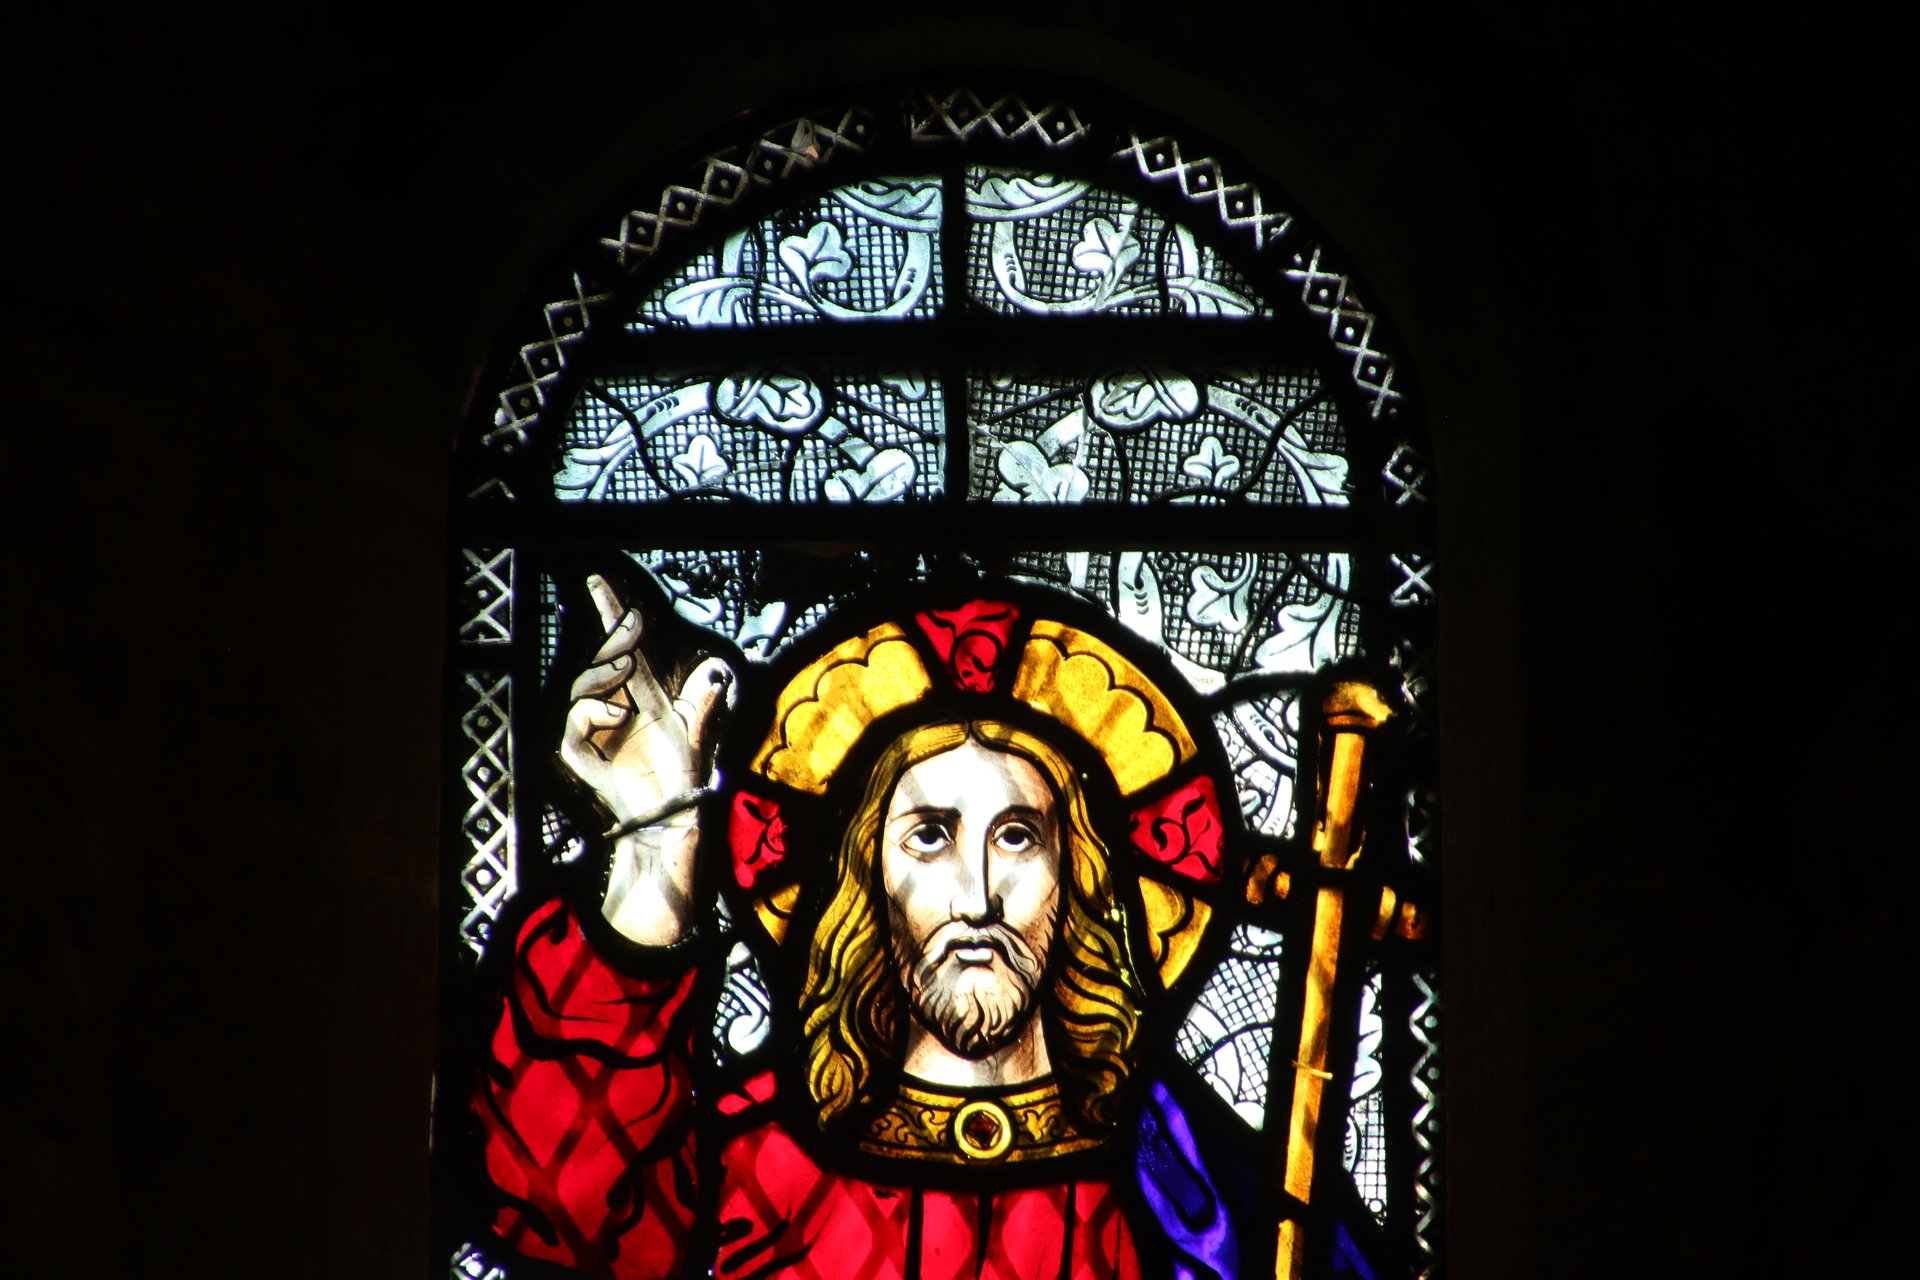 Christ in stained glass